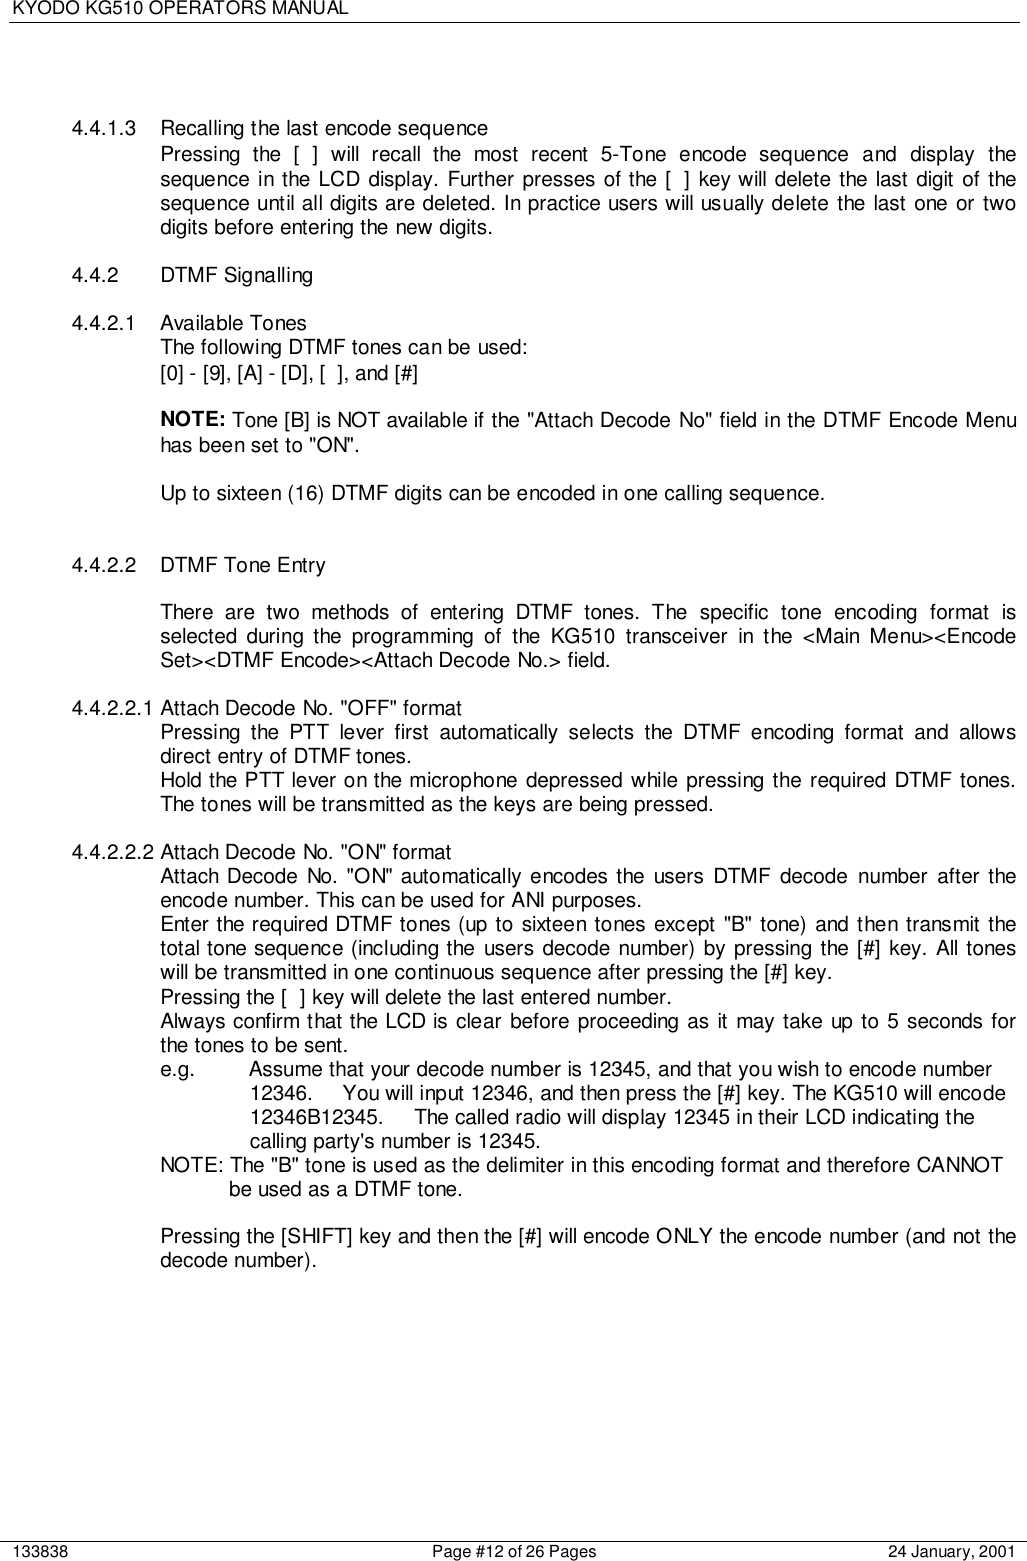 KYODO KG510 OPERATORS MANUAL133838 Page #12 of 26 Pages 24 January, 20014.4.1.3 Recalling the last encode sequencePressing the [ ] will recall the most recent 5-Tone encode sequence and display thesequence in the LCD display. Further presses of the [ ] key will delete the last digit of thesequence until all digits are deleted. In practice users will usually delete the last one or twodigits before entering the new digits.4.4.2 DTMF Signalling4.4.2.1 Available TonesThe following DTMF tones can be used:[0] - [9], [A] - [D], [ ], and [#]NOTE: Tone [B] is NOT available if the &quot;Attach Decode No&quot; field in the DTMF Encode Menuhas been set to &quot;ON&quot;.Up to sixteen (16) DTMF digits can be encoded in one calling sequence.4.4.2.2  DTMF Tone EntryThere are two methods of entering DTMF tones. The specific tone encoding format isselected during the programming of the KG510 transceiver in the &lt;Main Menu&gt;&lt;EncodeSet&gt;&lt;DTMF Encode&gt;&lt;Attach Decode No.&gt; field.4.4.2.2.1 Attach Decode No. &quot;OFF&quot; formatPressing the PTT lever first automatically selects the DTMF encoding format and allowsdirect entry of DTMF tones.Hold the PTT lever on the microphone depressed while pressing the required DTMF tones.The tones will be transmitted as the keys are being pressed.4.4.2.2.2 Attach Decode No. &quot;ON&quot; formatAttach Decode No. &quot;ON&quot; automatically encodes the users DTMF decode number after theencode number. This can be used for ANI purposes.Enter the required DTMF tones (up to sixteen tones except &quot;B&quot; tone) and then transmit thetotal tone sequence (including the users decode number) by pressing the [#] key. All toneswill be transmitted in one continuous sequence after pressing the [#] key.Pressing the [ ] key will delete the last entered number.Always confirm that the LCD is clear before proceeding as it may take up to 5 seconds forthe tones to be sent.e.g. Assume that your decode number is 12345, and that you wish to encode number 12346.     You will input 12346, and then press the [#] key. The KG510 will encode 12346B12345.     The called radio will display 12345 in their LCD indicating the calling party&apos;s number is 12345.NOTE: The &quot;B&quot; tone is used as the delimiter in this encoding format and therefore CANNOT be used as a DTMF tone.Pressing the [SHIFT] key and then the [#] will encode ONLY the encode number (and not thedecode number).